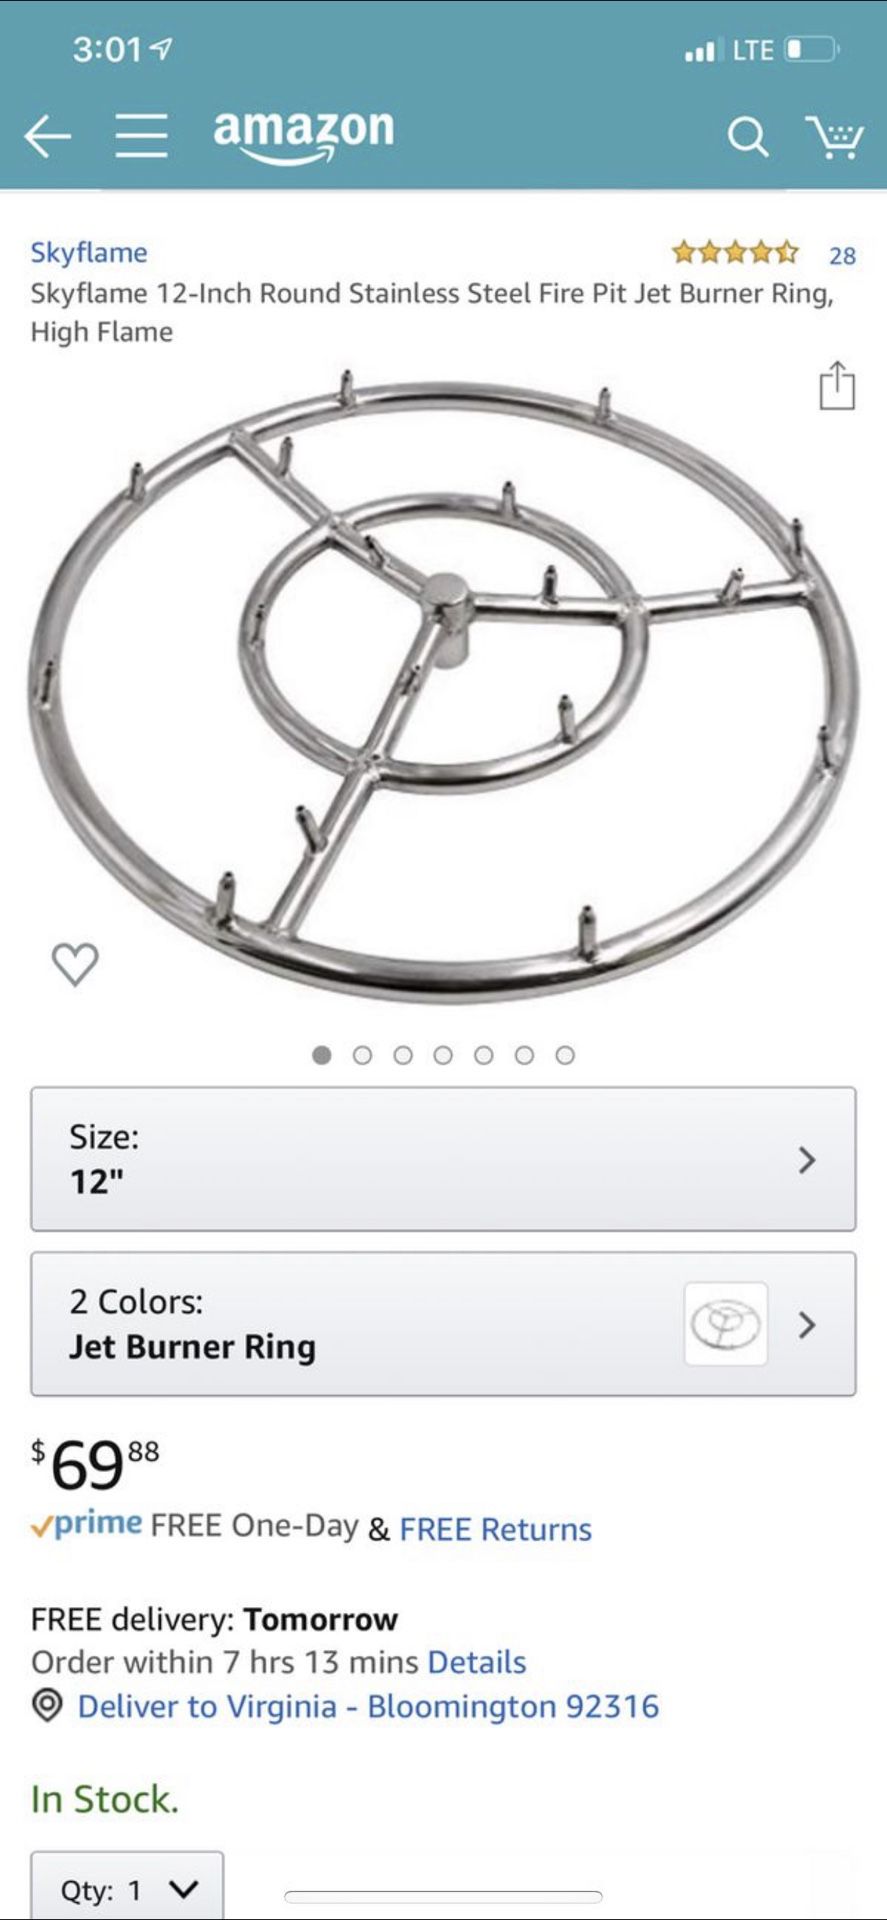 Skyflame 4.4 out of 5 stars 28 Reviews Skyflame 12-Inch Round Stainless Steel Fire Pit Jet Burner Ring, High Flame